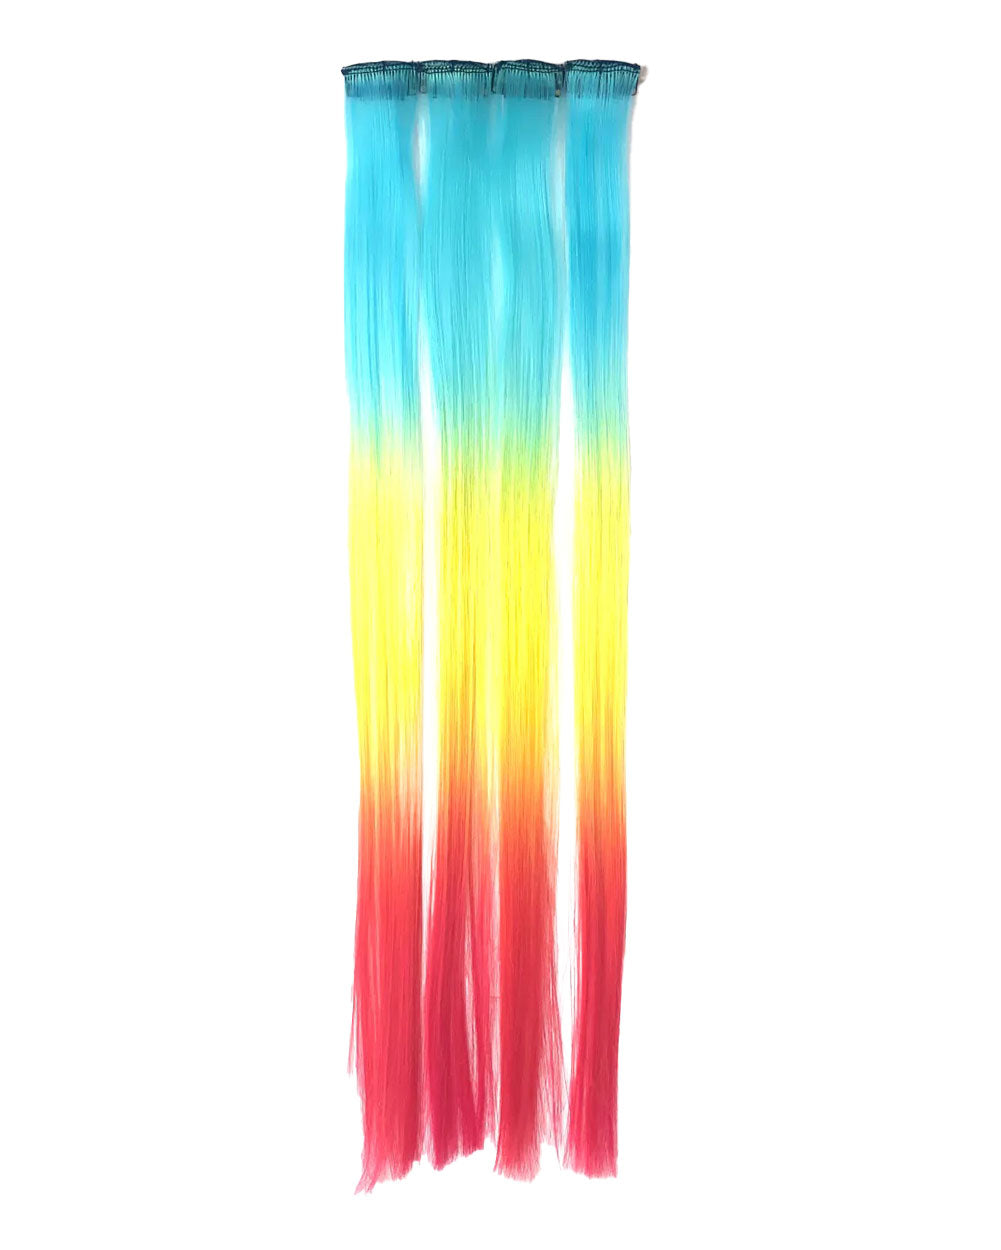 Lunautics Rainbow Ombre Clip-In Hair Extensions-Rainbow-Front